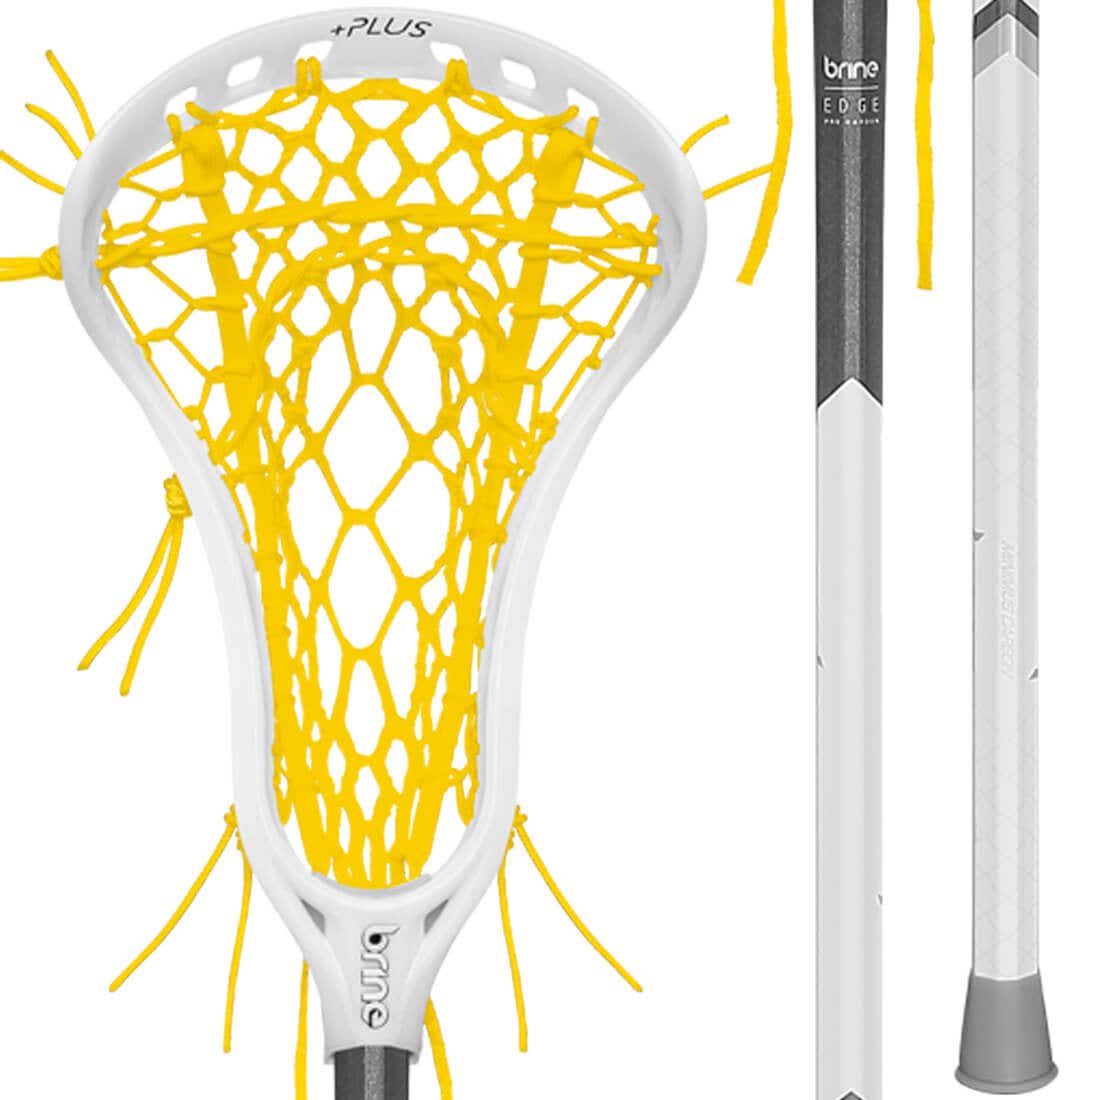 https://www.lacrosseunlimited.com/media/catalog/product/e/d/edge-pro-1.jpg?optimize=high&fit=bounds&height=1120&width=1120